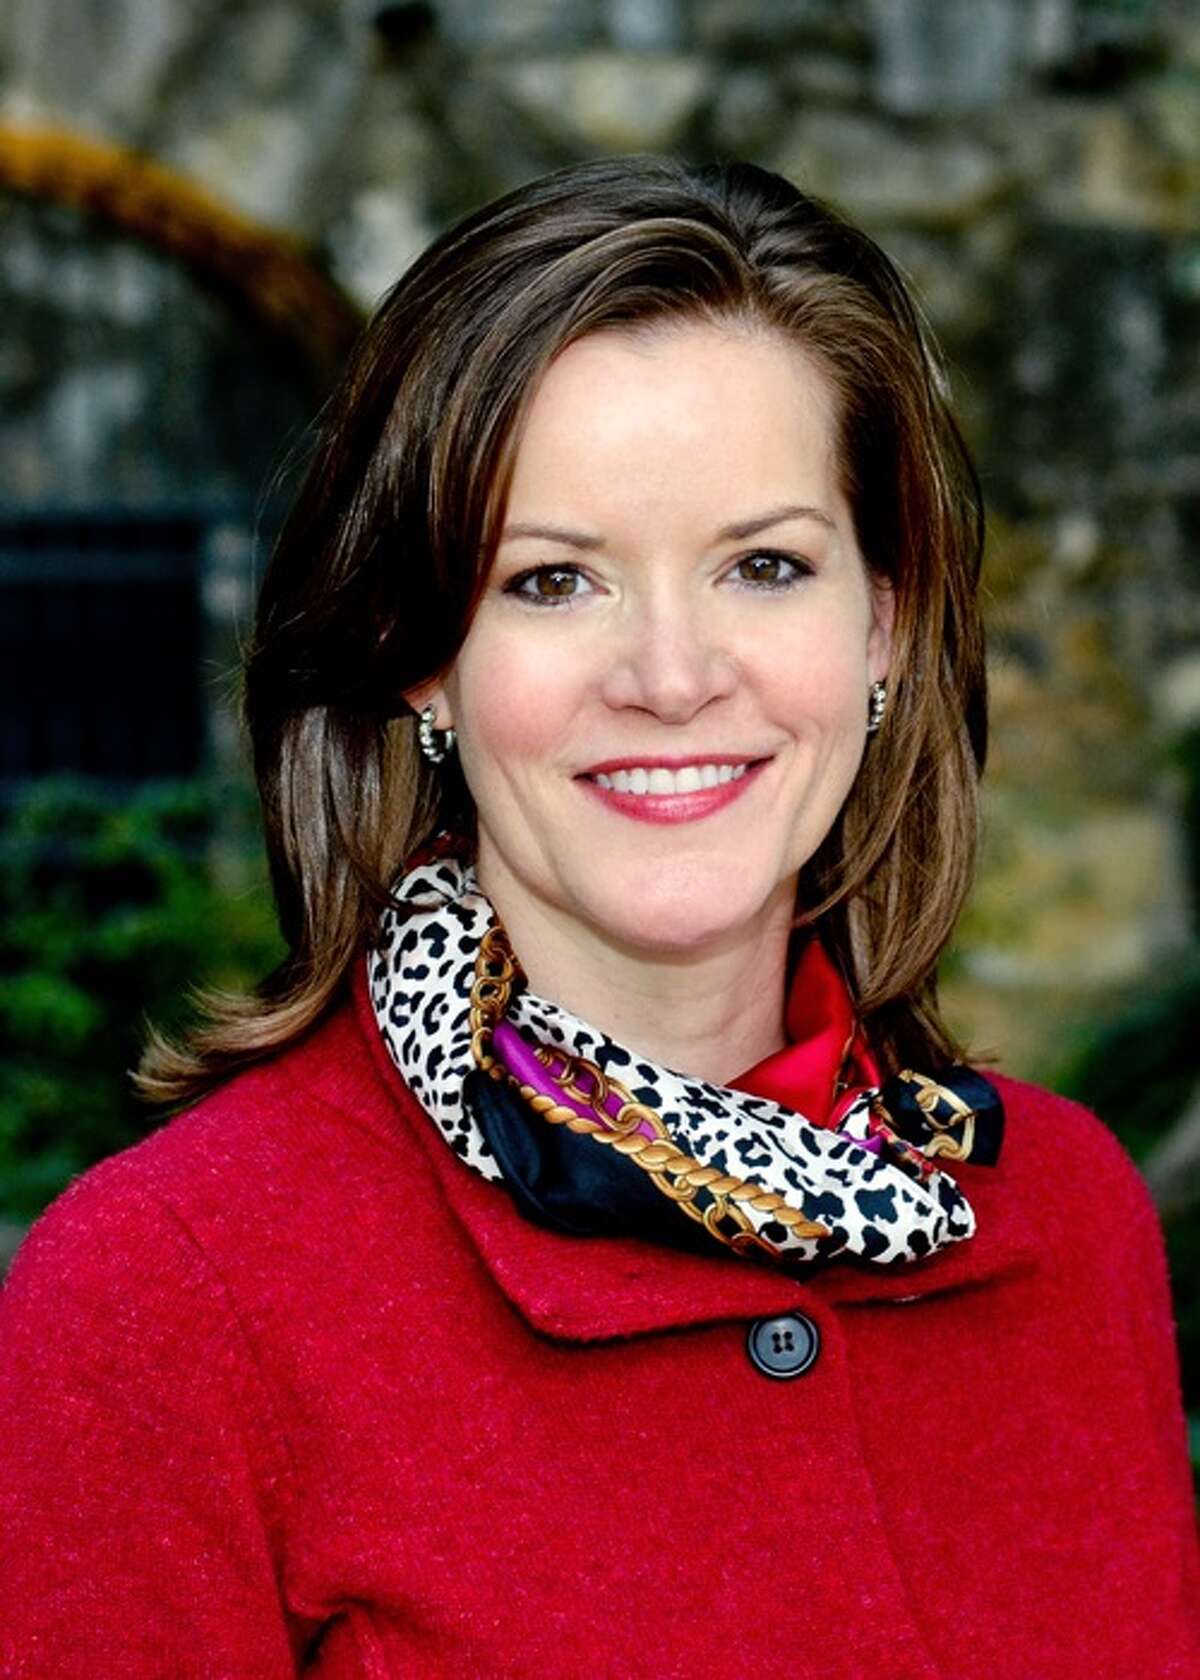 Becky Dinnin, vice president of image and communication with the San Antonio Chamber of Commerce, will assume her new position as director of the Alamo on Feb. 17.